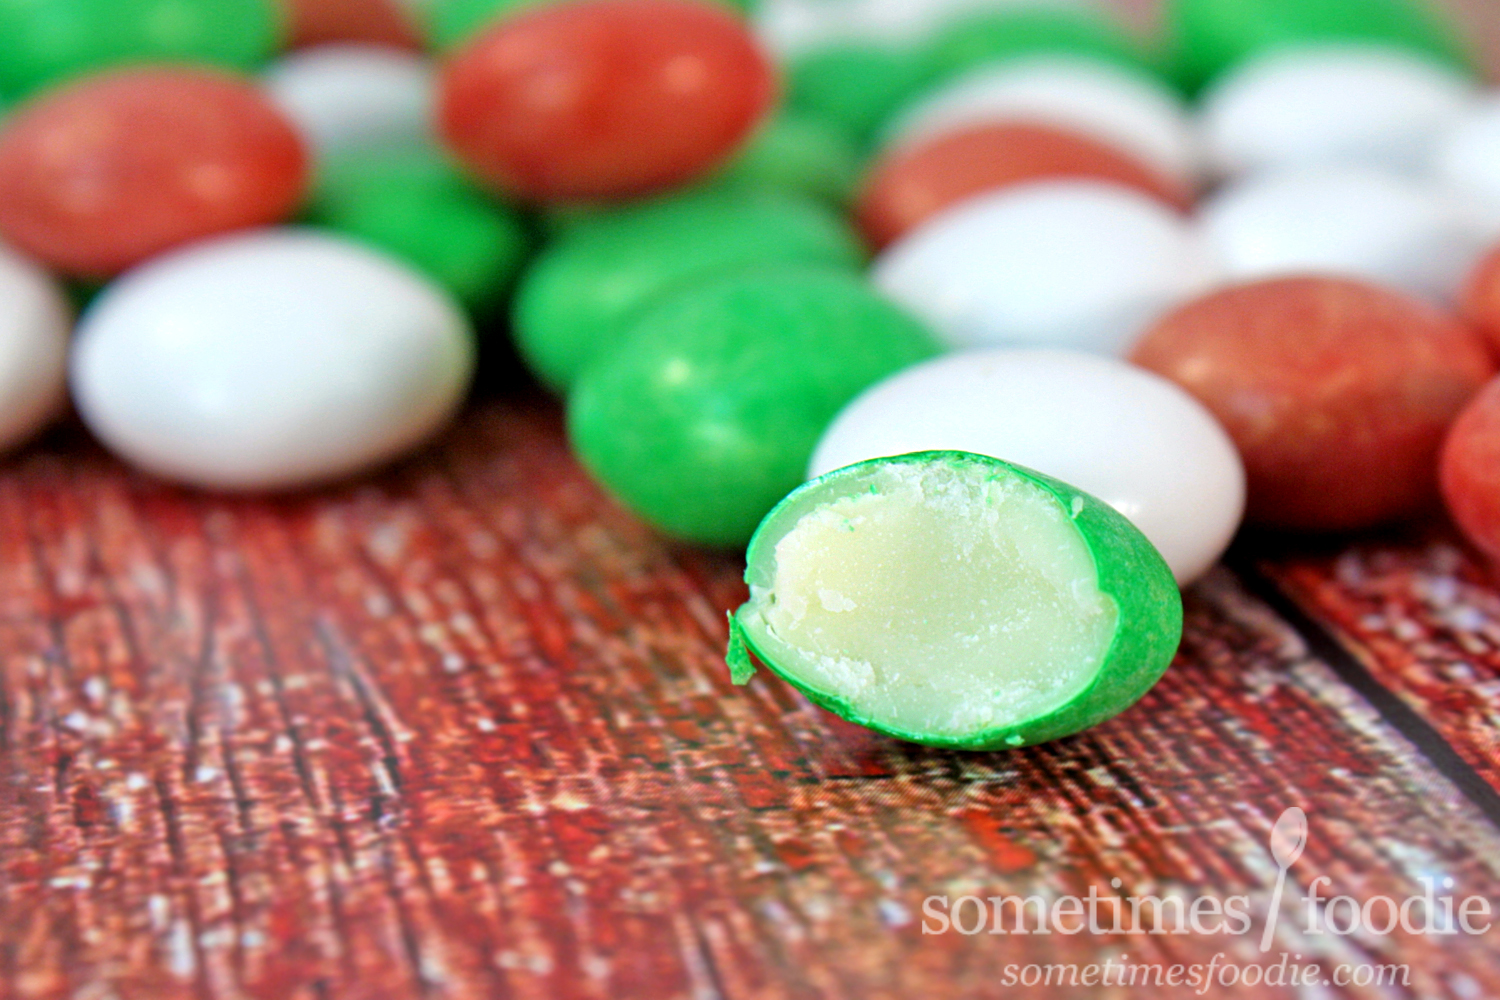 Sometimes Foodie: Shimmery White Chocolate m&m's - Target